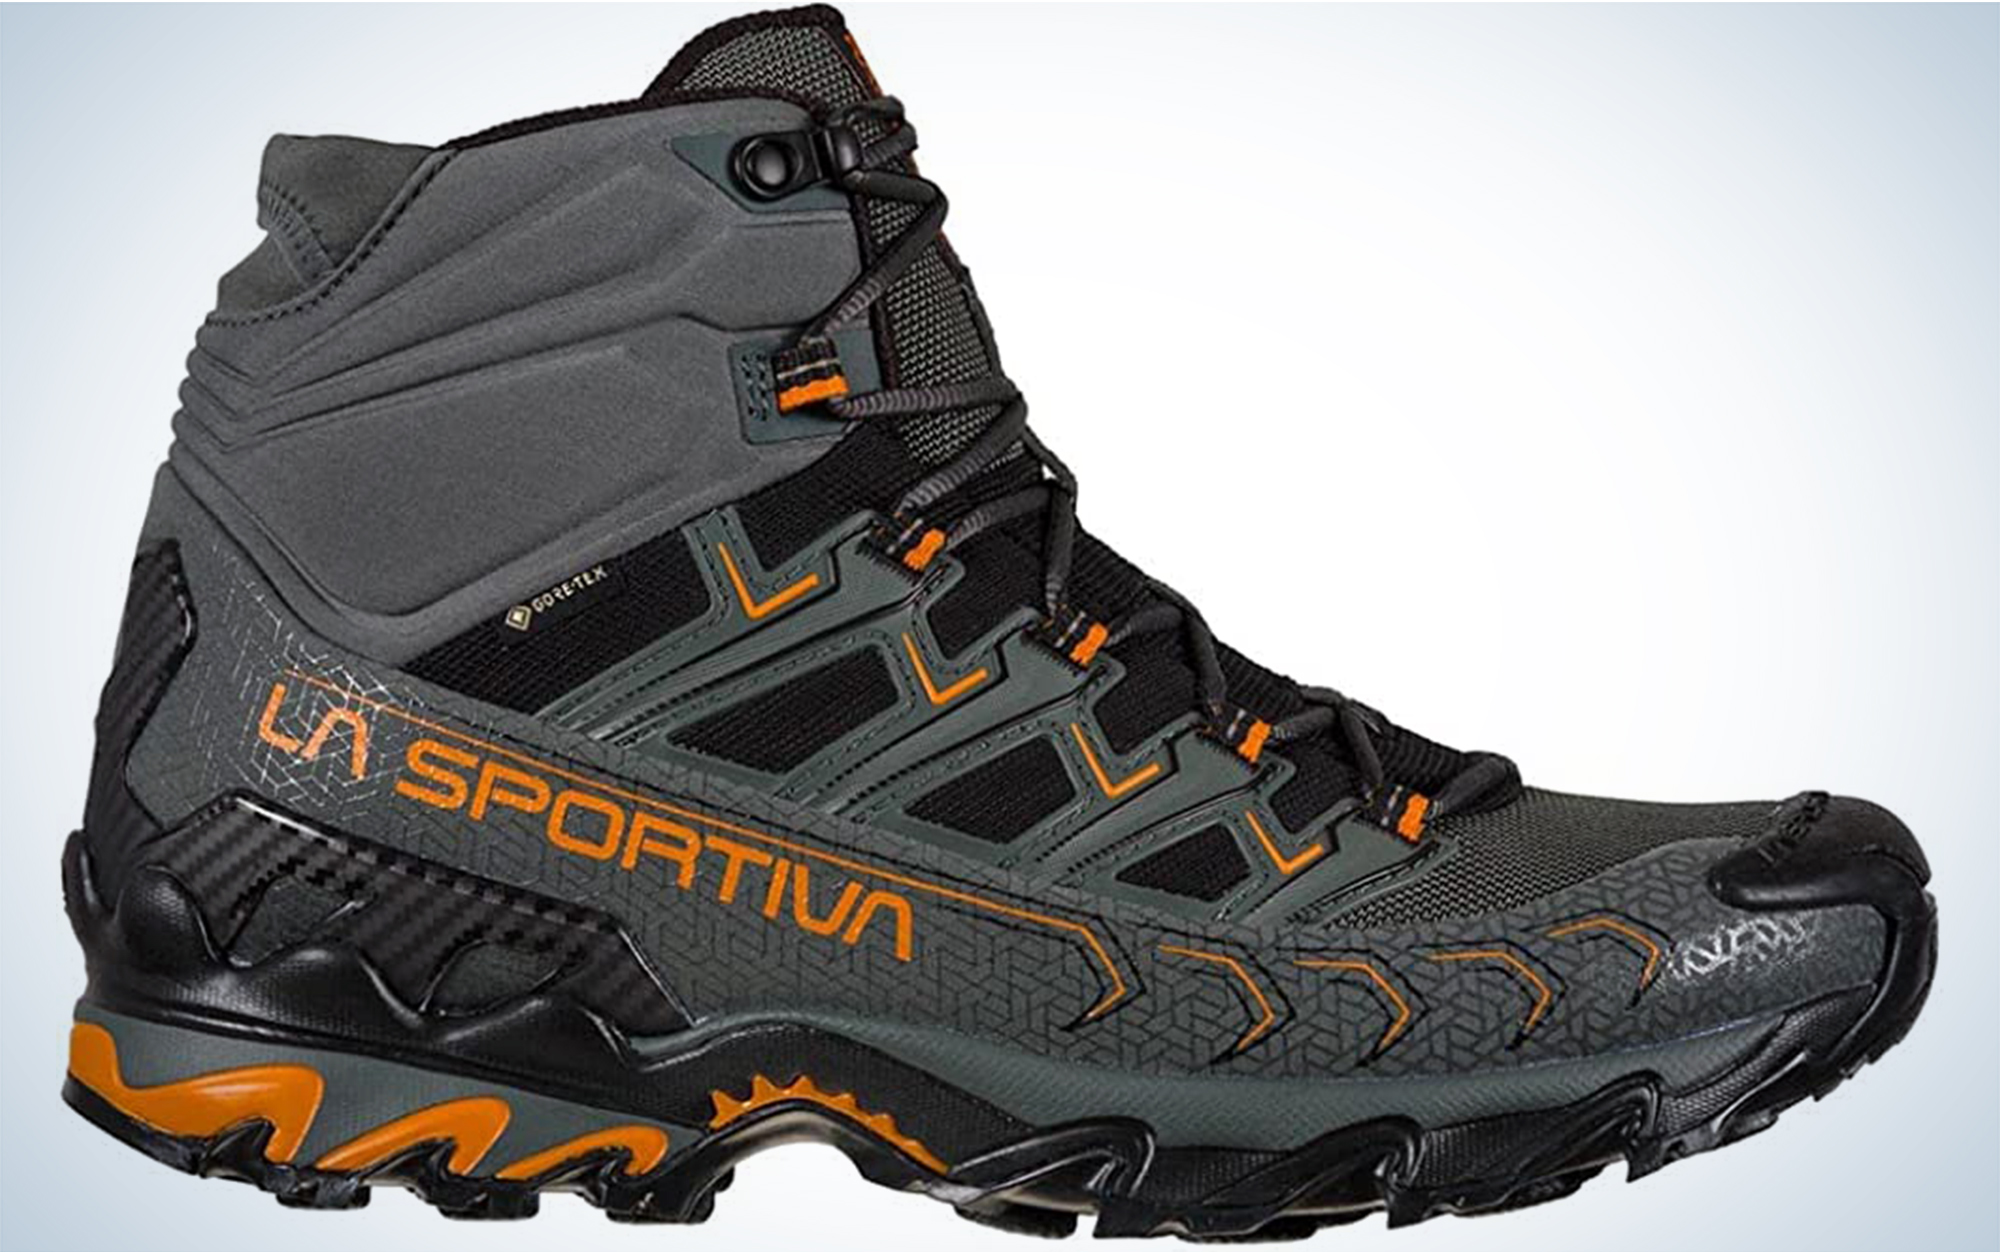 The La Sportiva Ultra Raptor ll Mid GTX are best for mixed terrain.